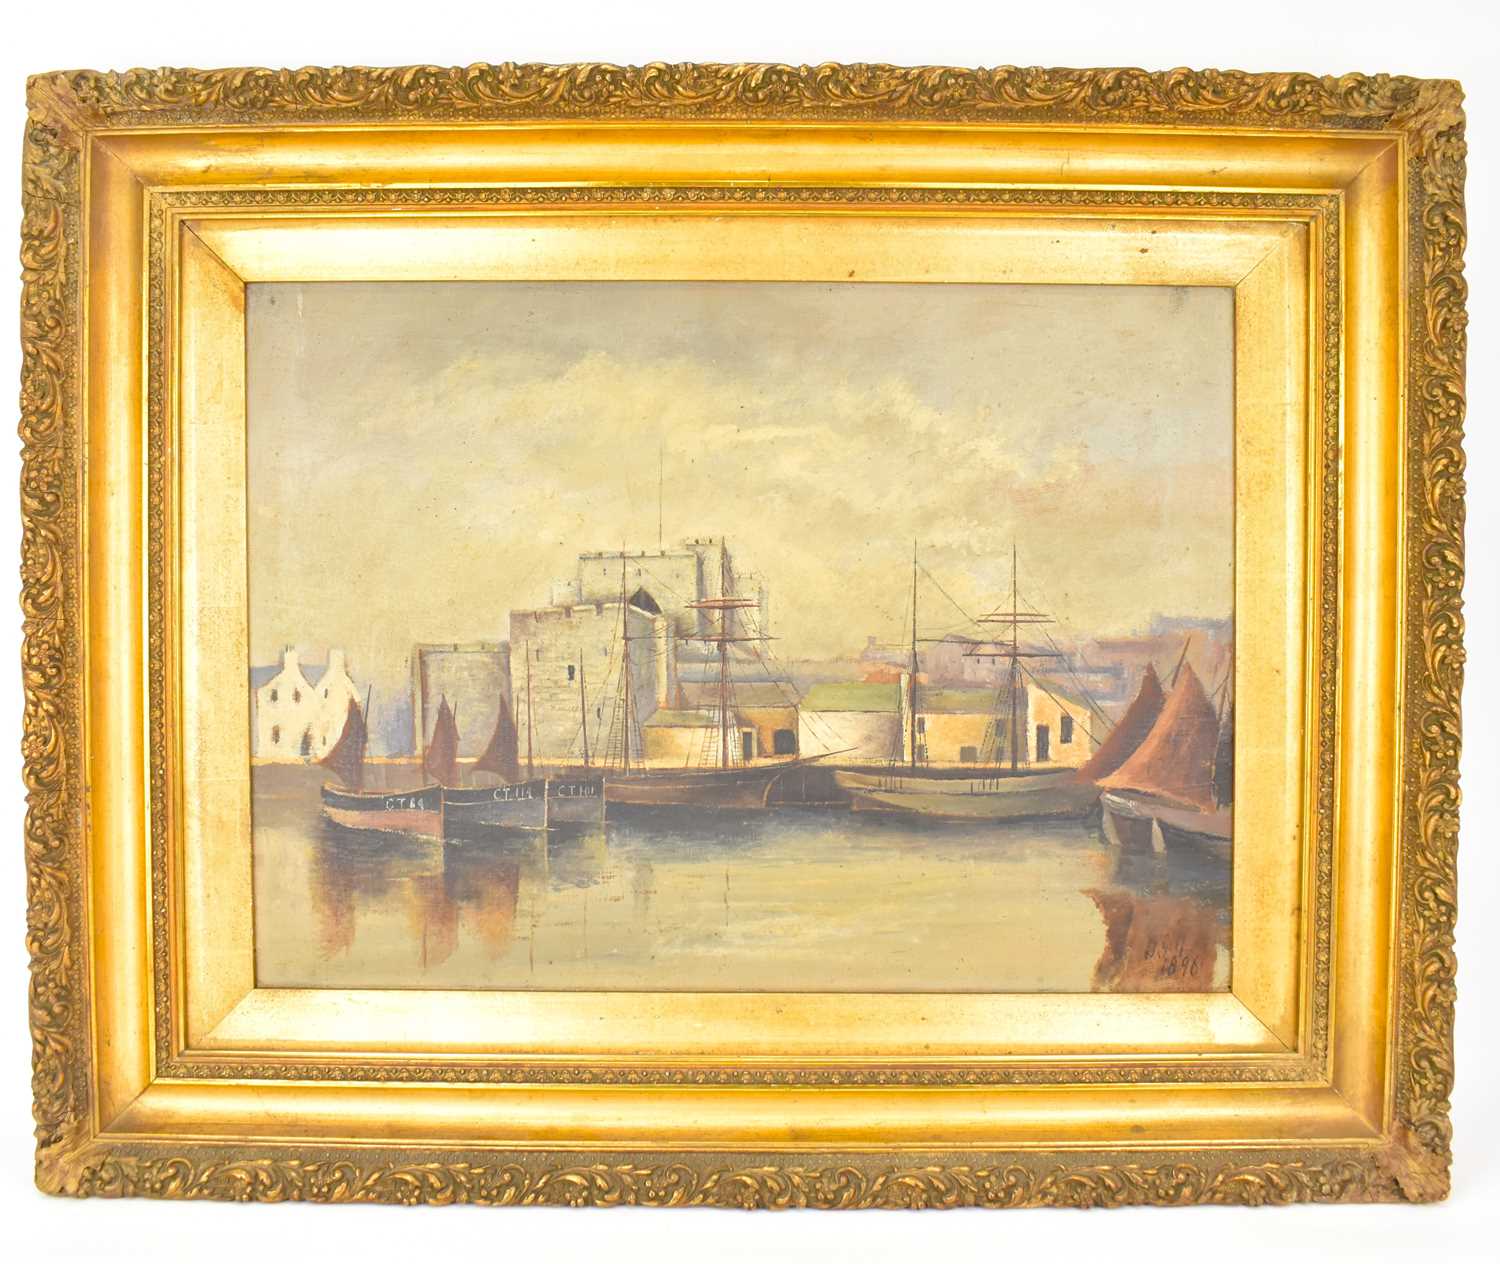 J. GILL; oil on canvas, harbour scene, signed and dated 1896 lower right, 36 x 51cm, in gilt wood